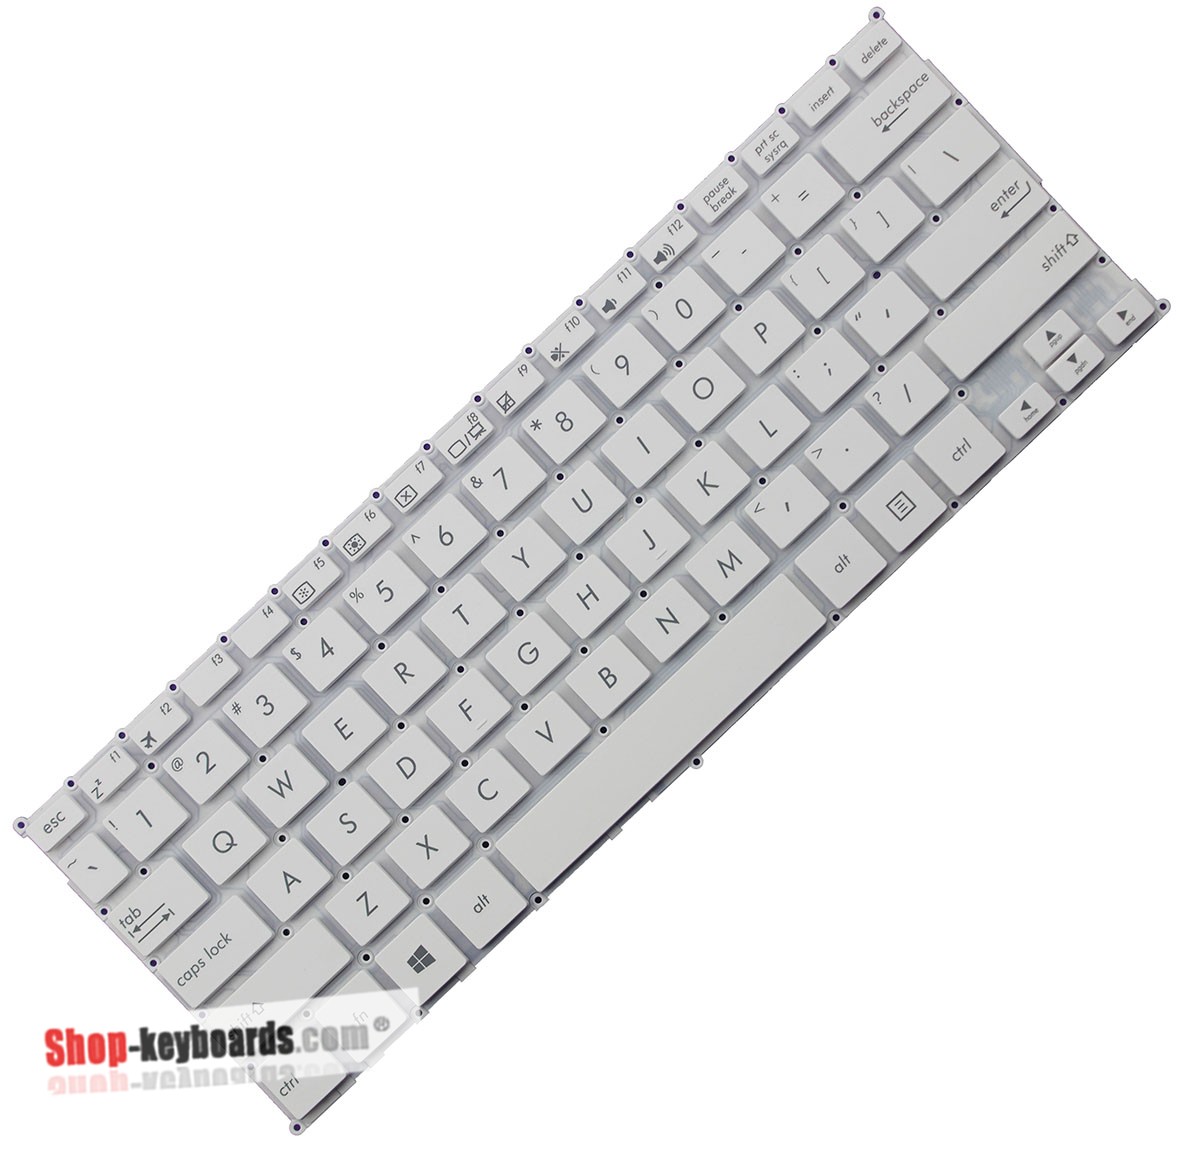 Asus 0KNL0-1120AR00 Keyboard replacement